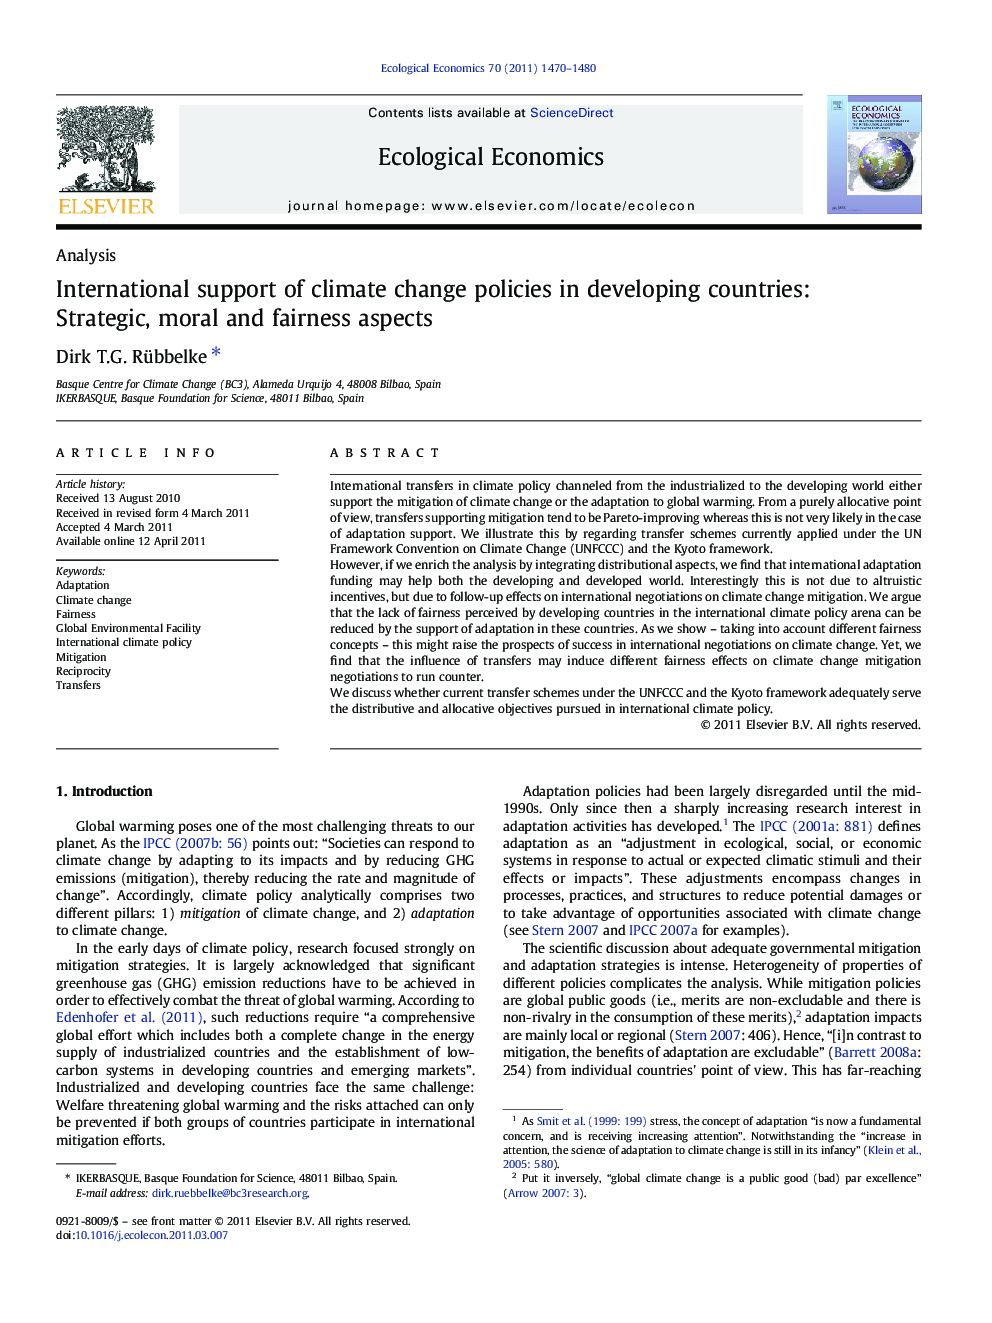 International support of climate change policies in developing countries: Strategic, moral and fairness aspects